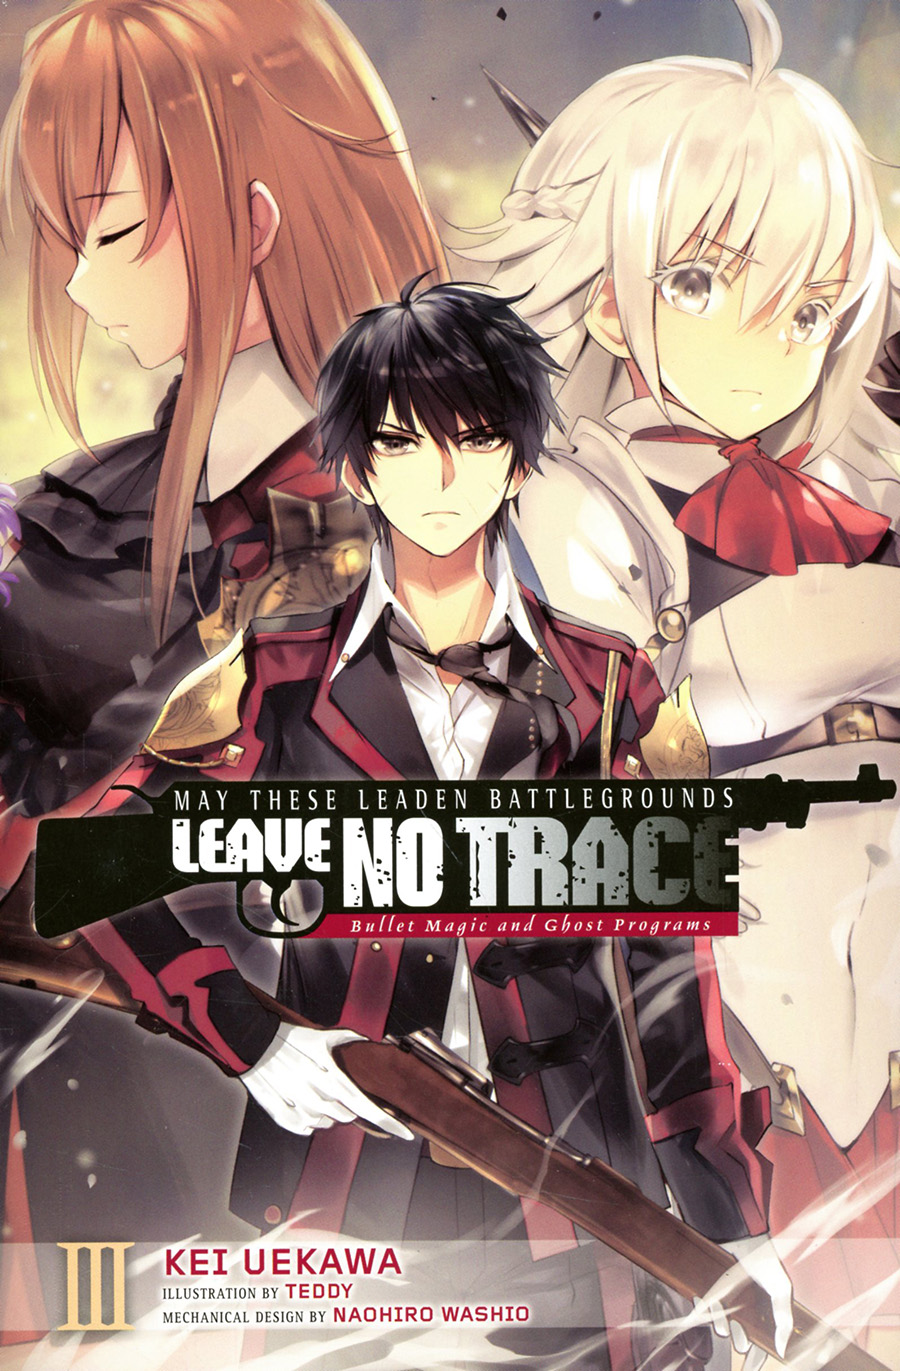 May These Leaden Battlegrounds Leave No Trace Light Novel Vol 3 Bullet Magic And Ghost Programs